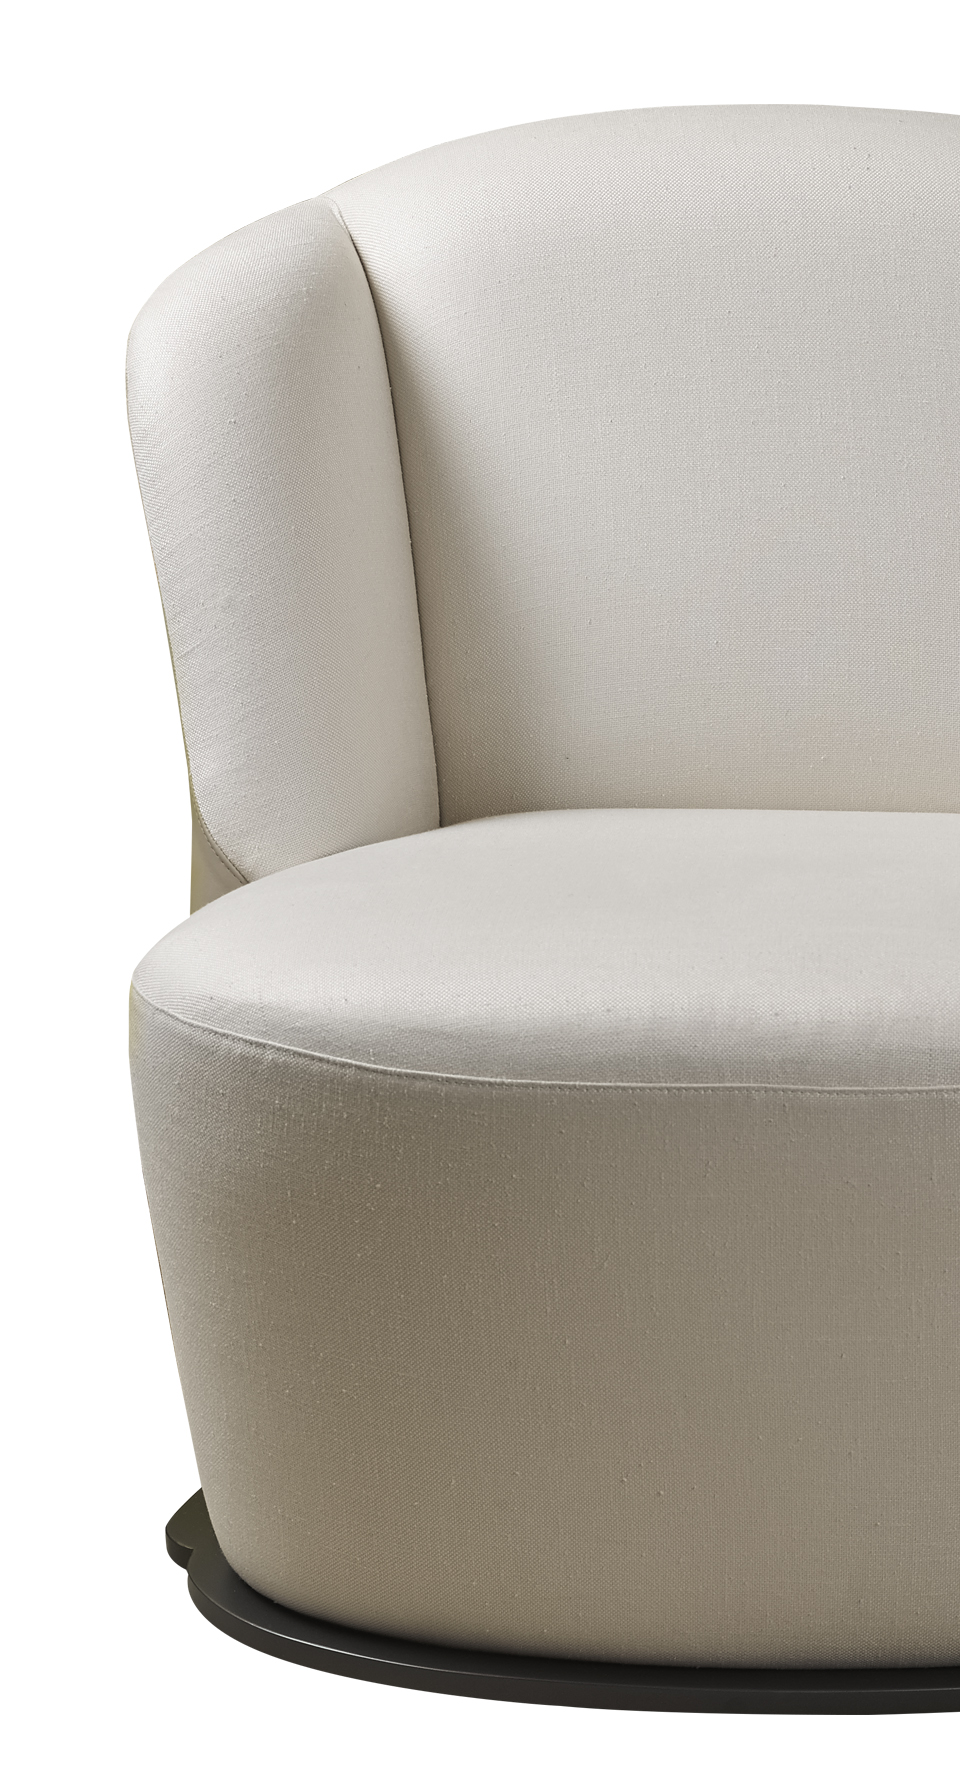 Detail of Rosaspina, an armchair with fabric and leather covering and a metal base, from Promeomoria's catalogue | Promemoria